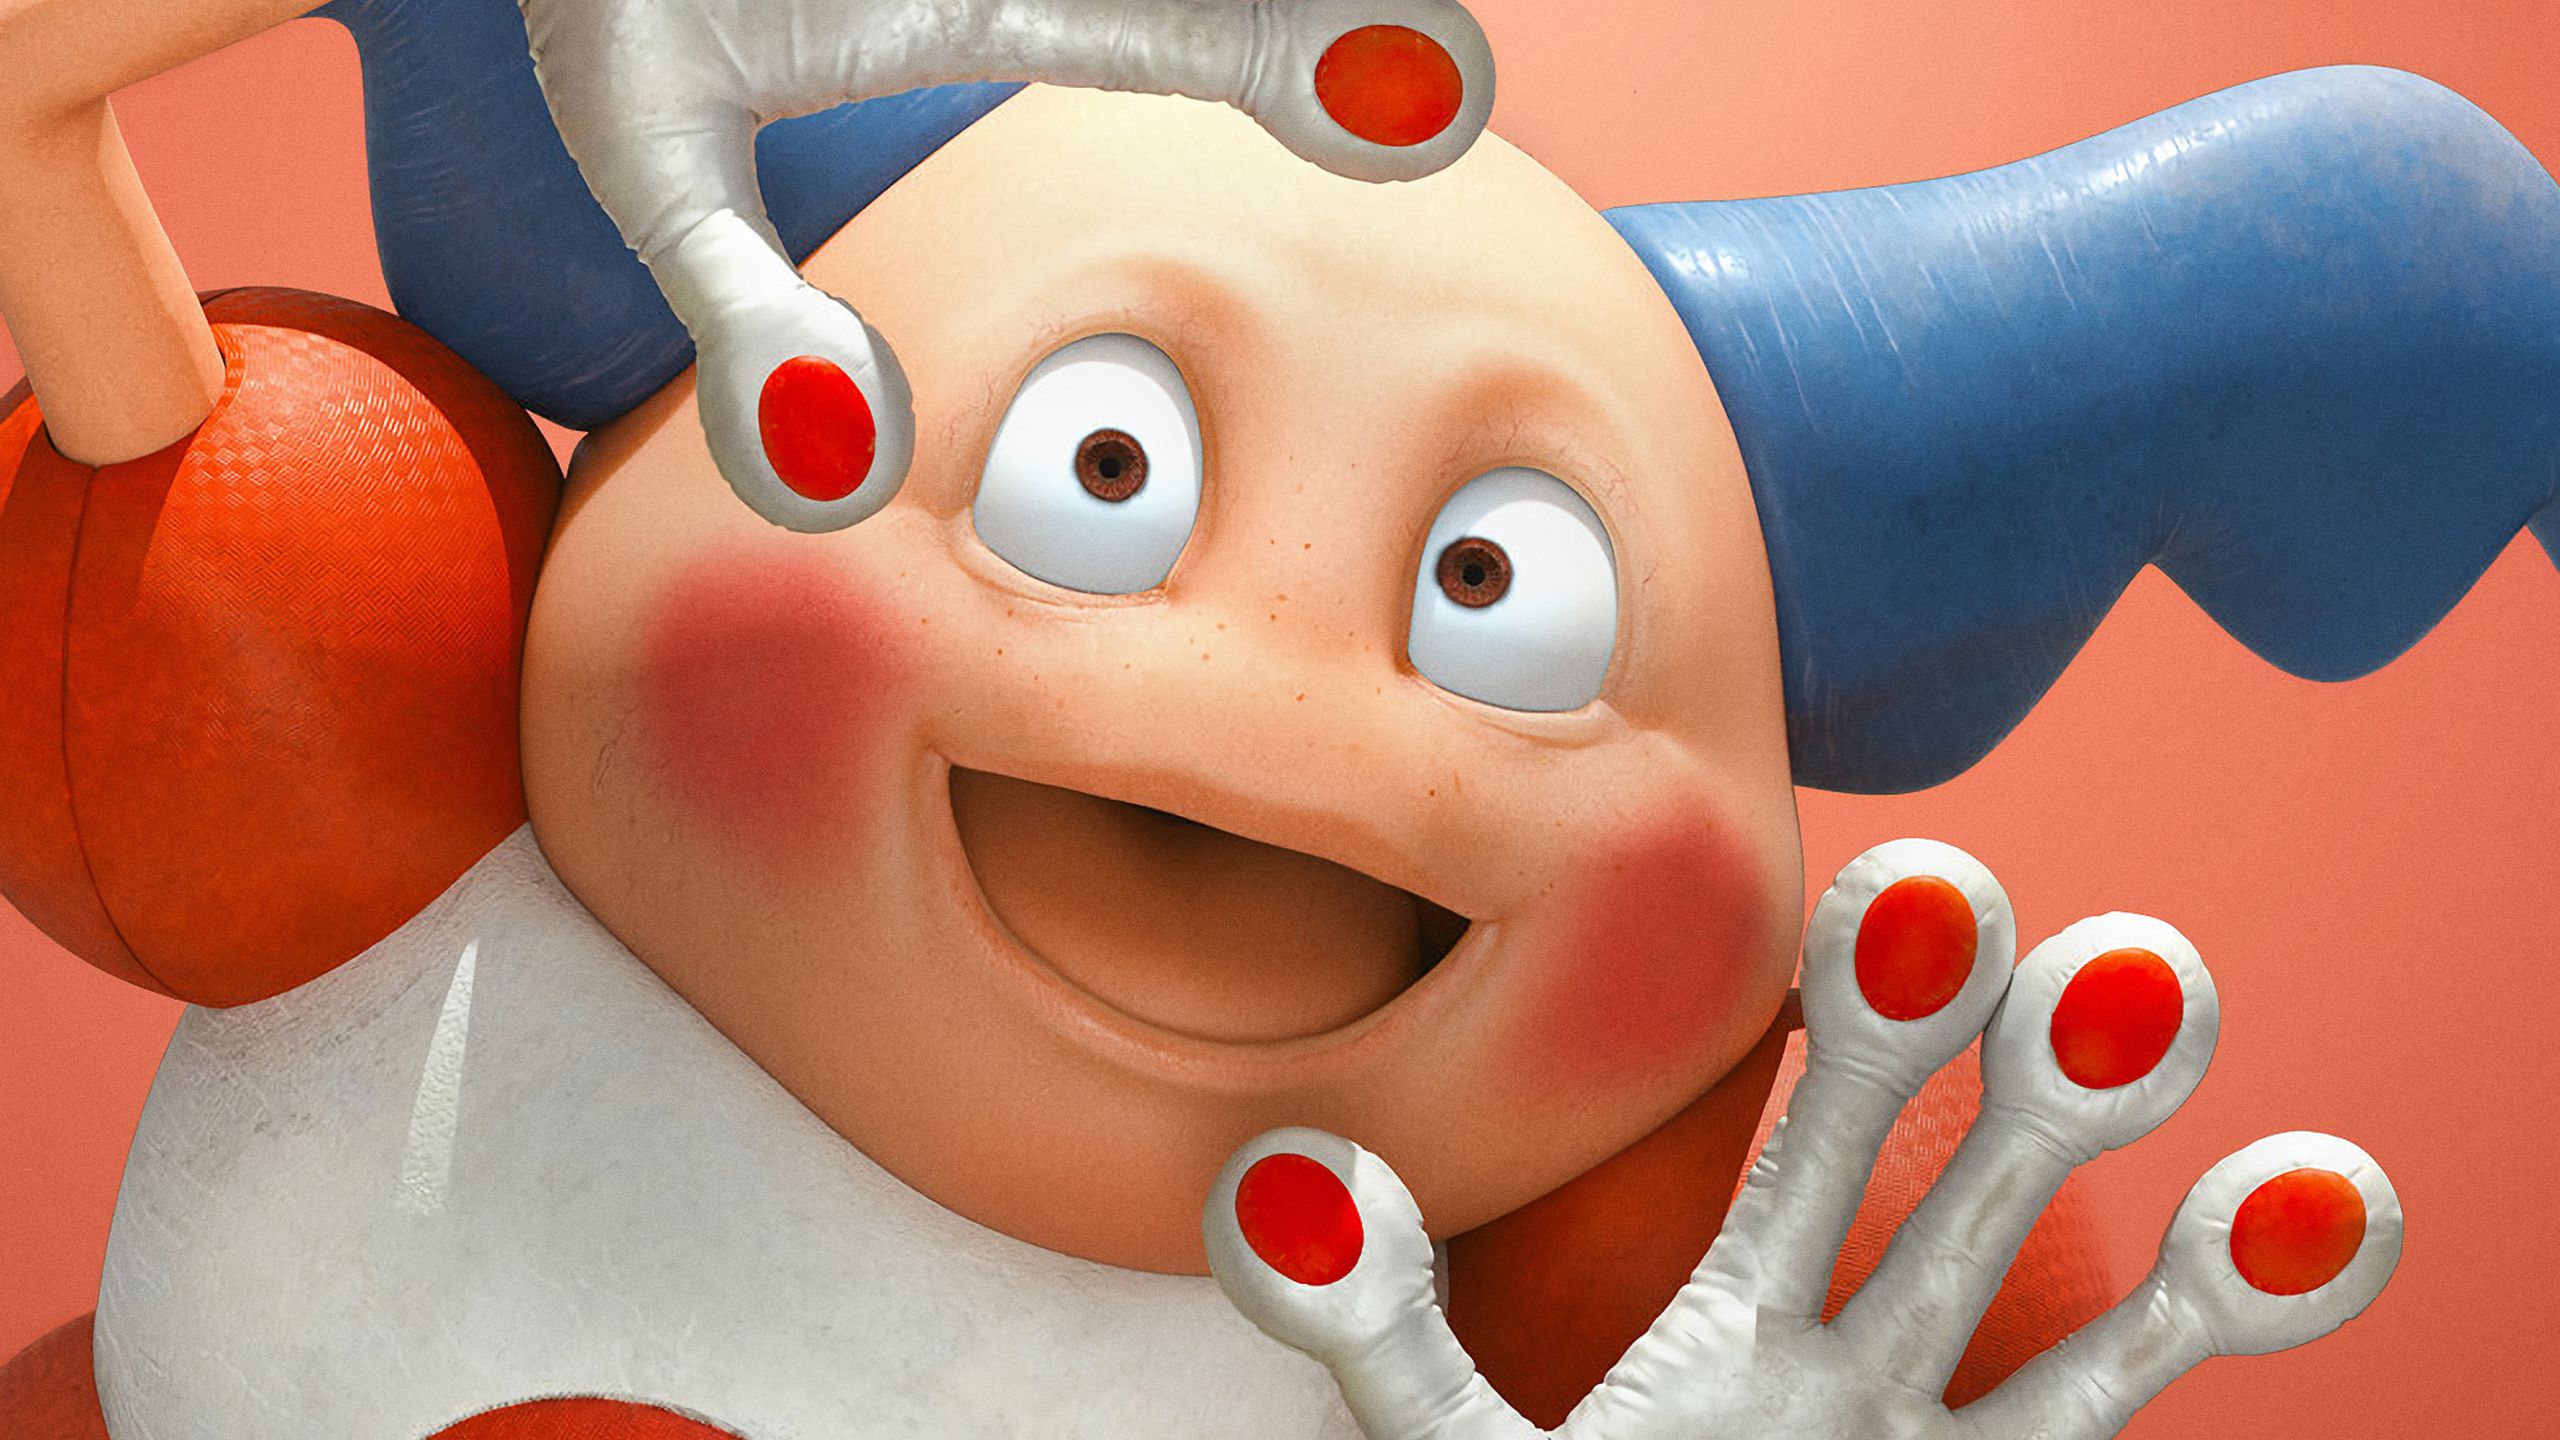 Mr. Mime in Pokemon Detective Pikachu Movie 1440P Resolution Wallpaper, HD Movies 4K Wallpaper, Image, Photo and Background